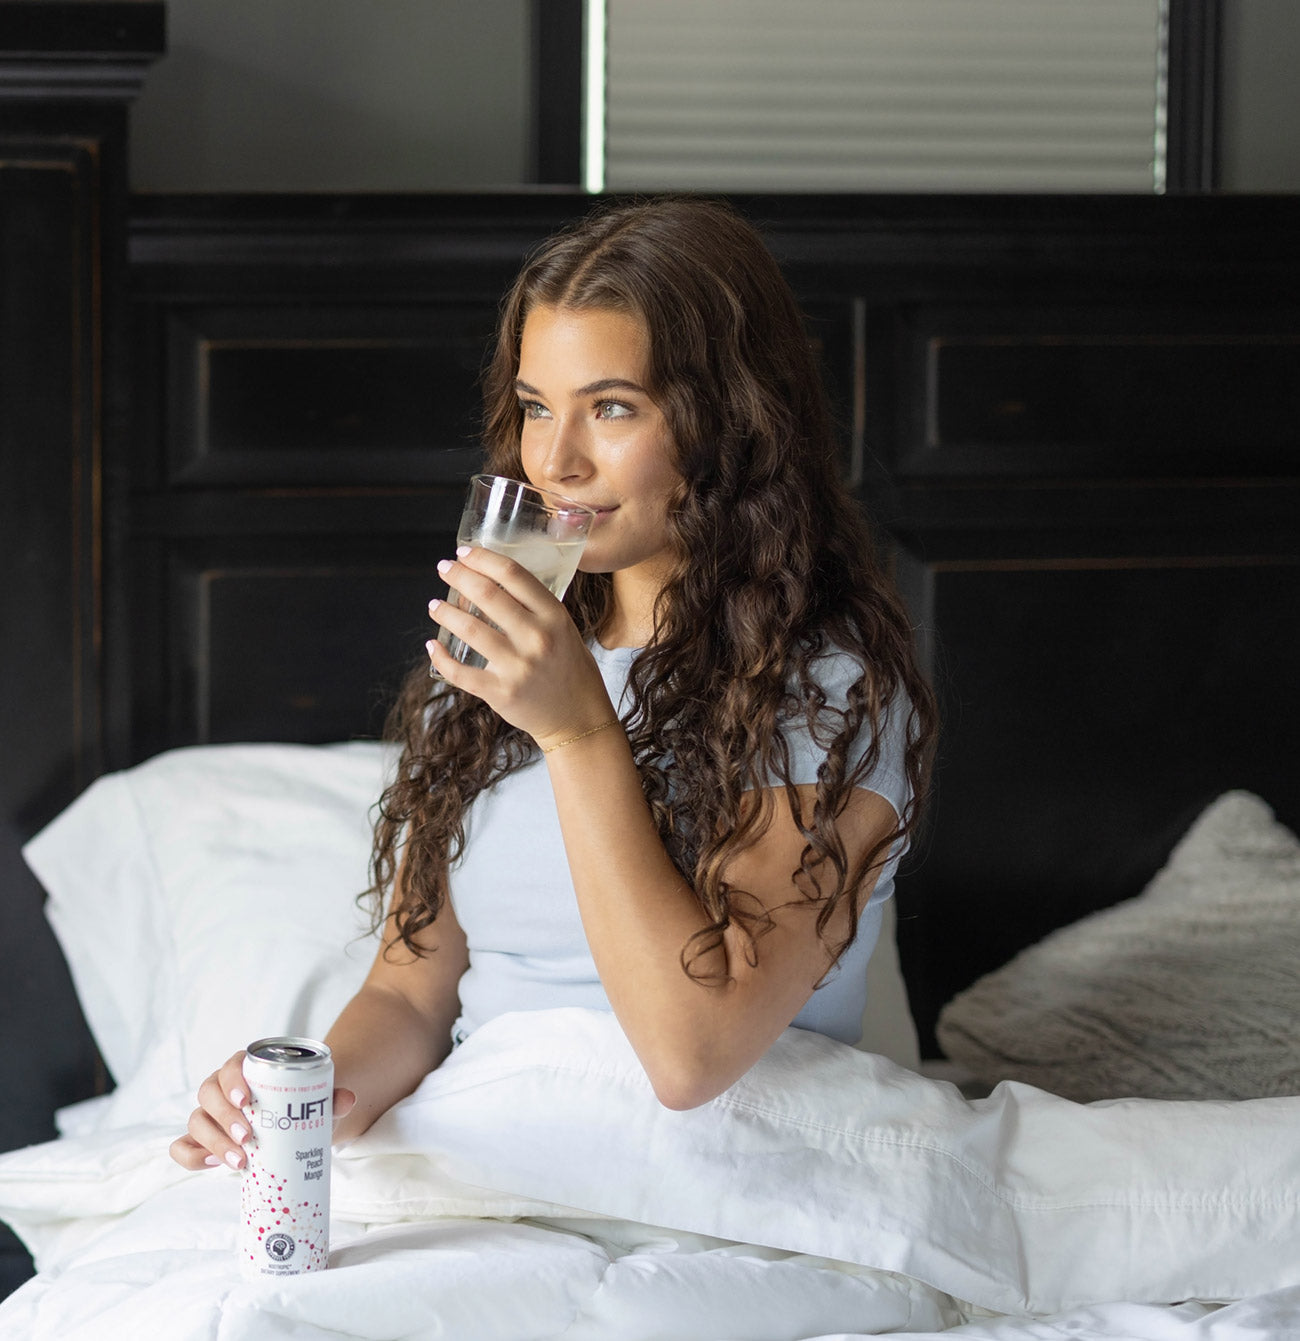 Woman waking up in bed drinking BioLift